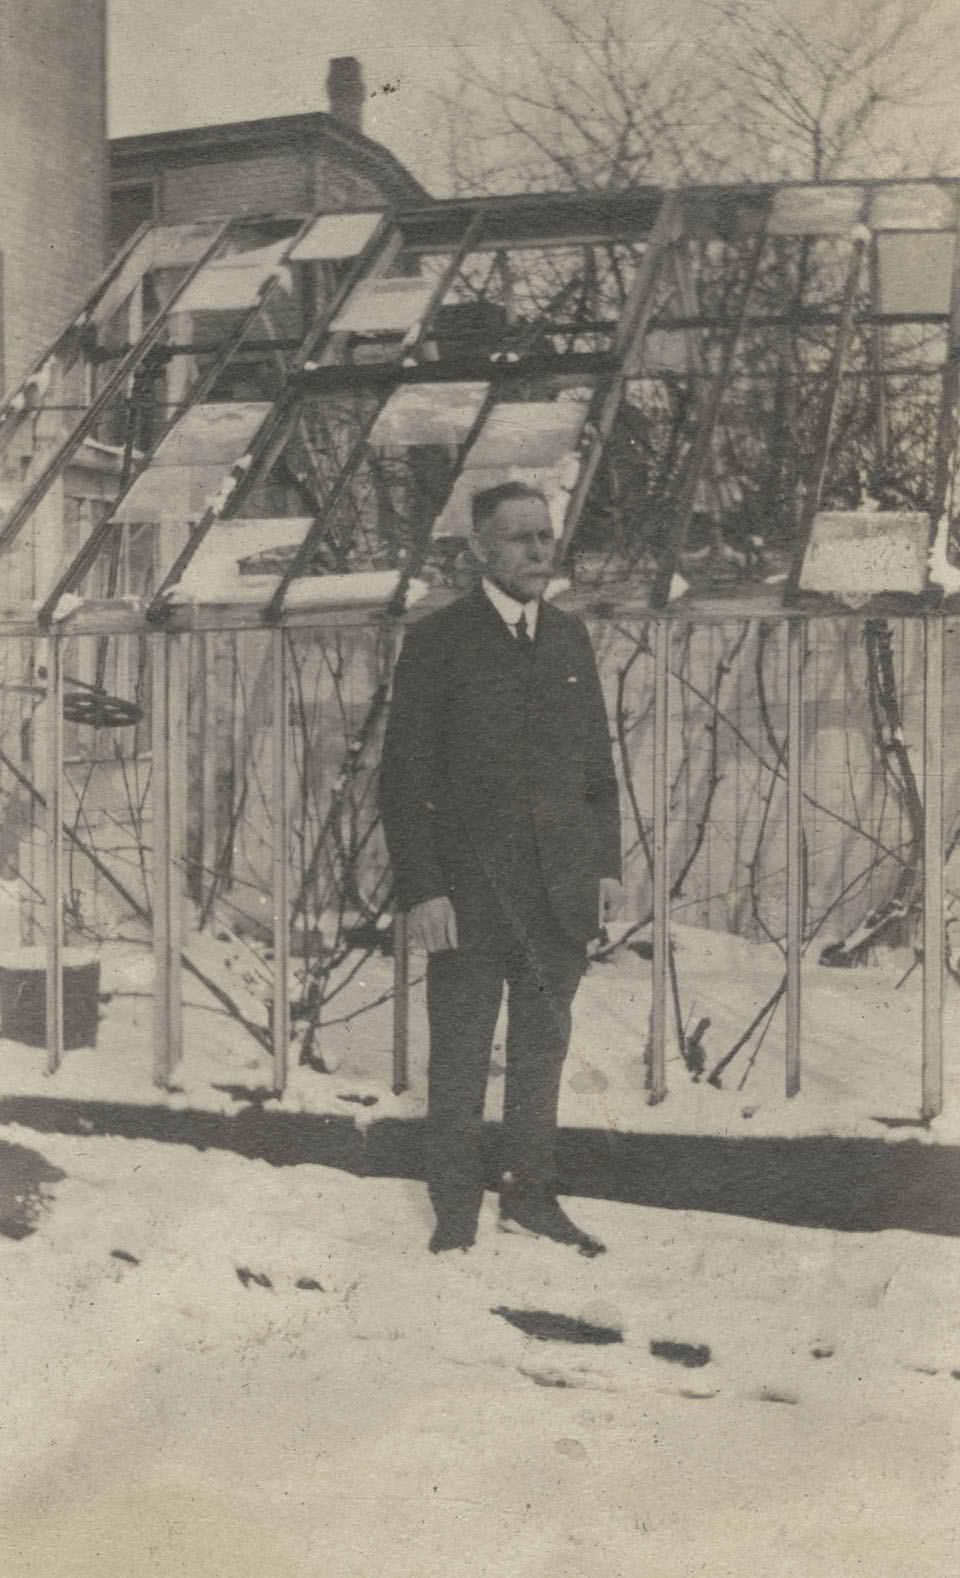 creighton : Father Charles E. Creighton in front of greenhouse after Halifax Explosion, Portland St., Dartmouth